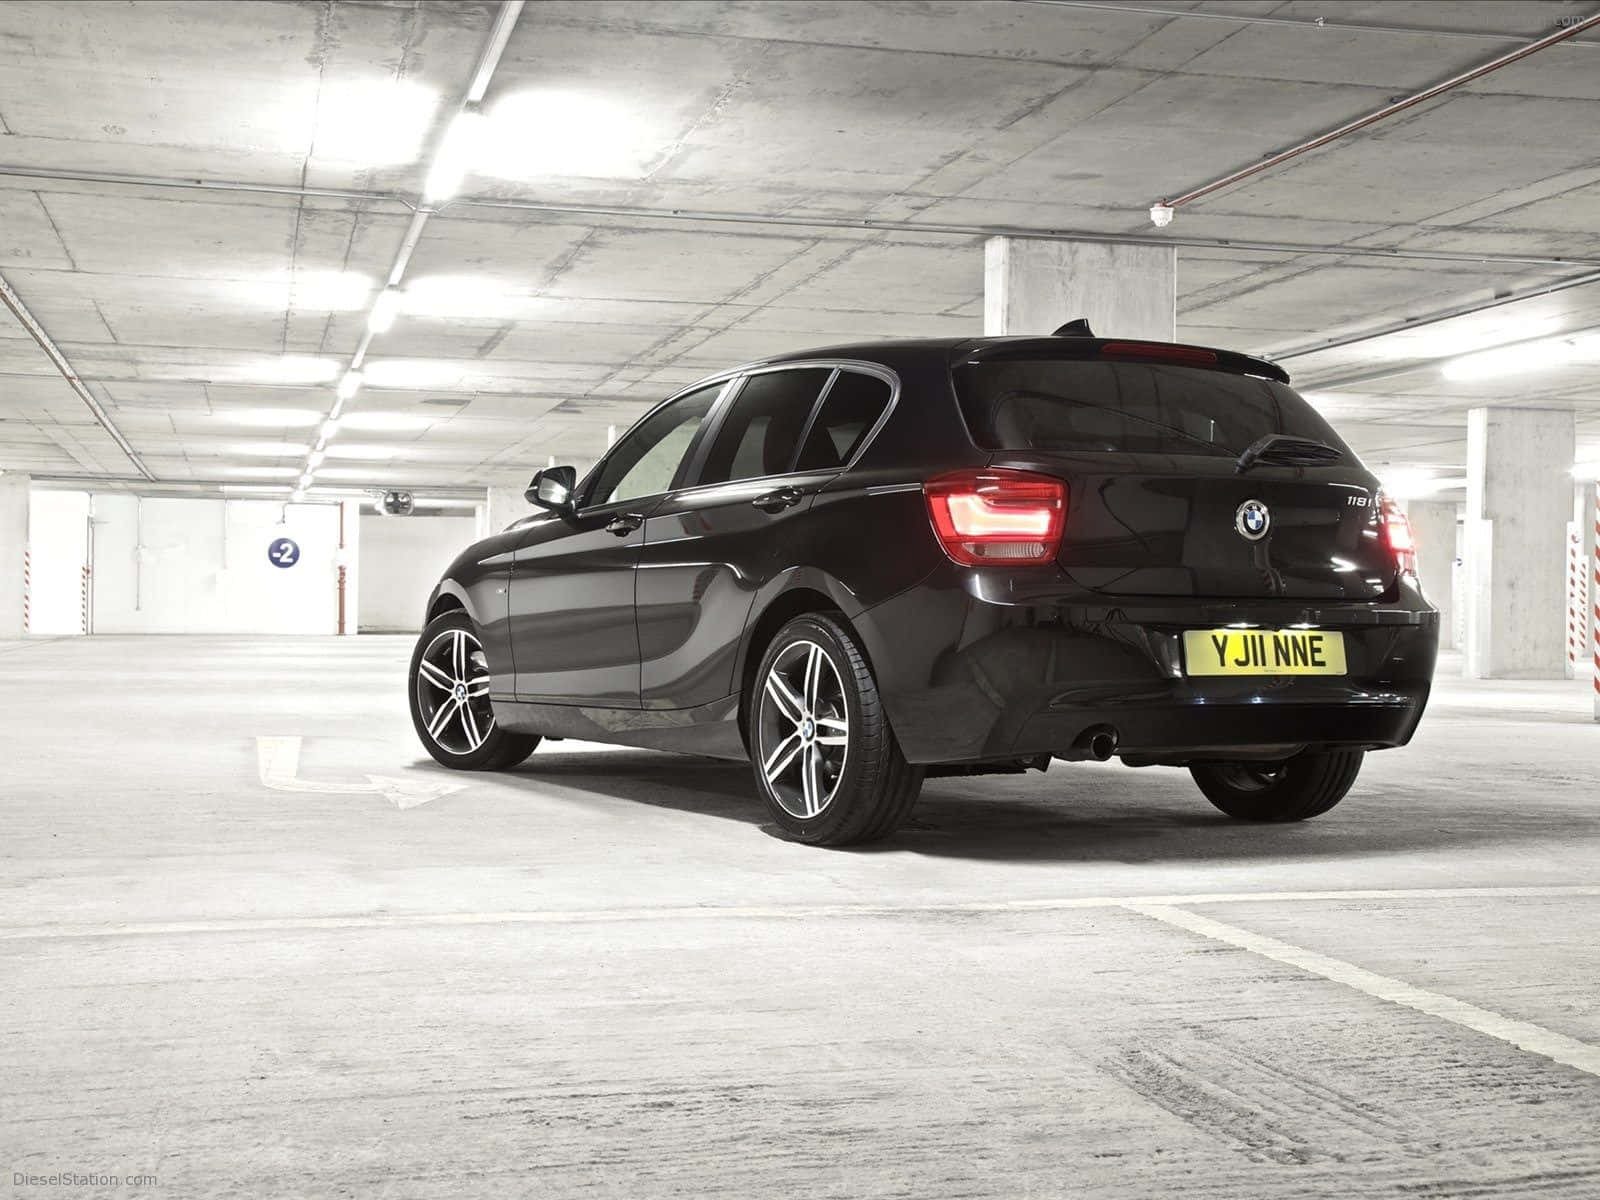 Sleek and Stylish BMW 1 Series in Action Wallpaper